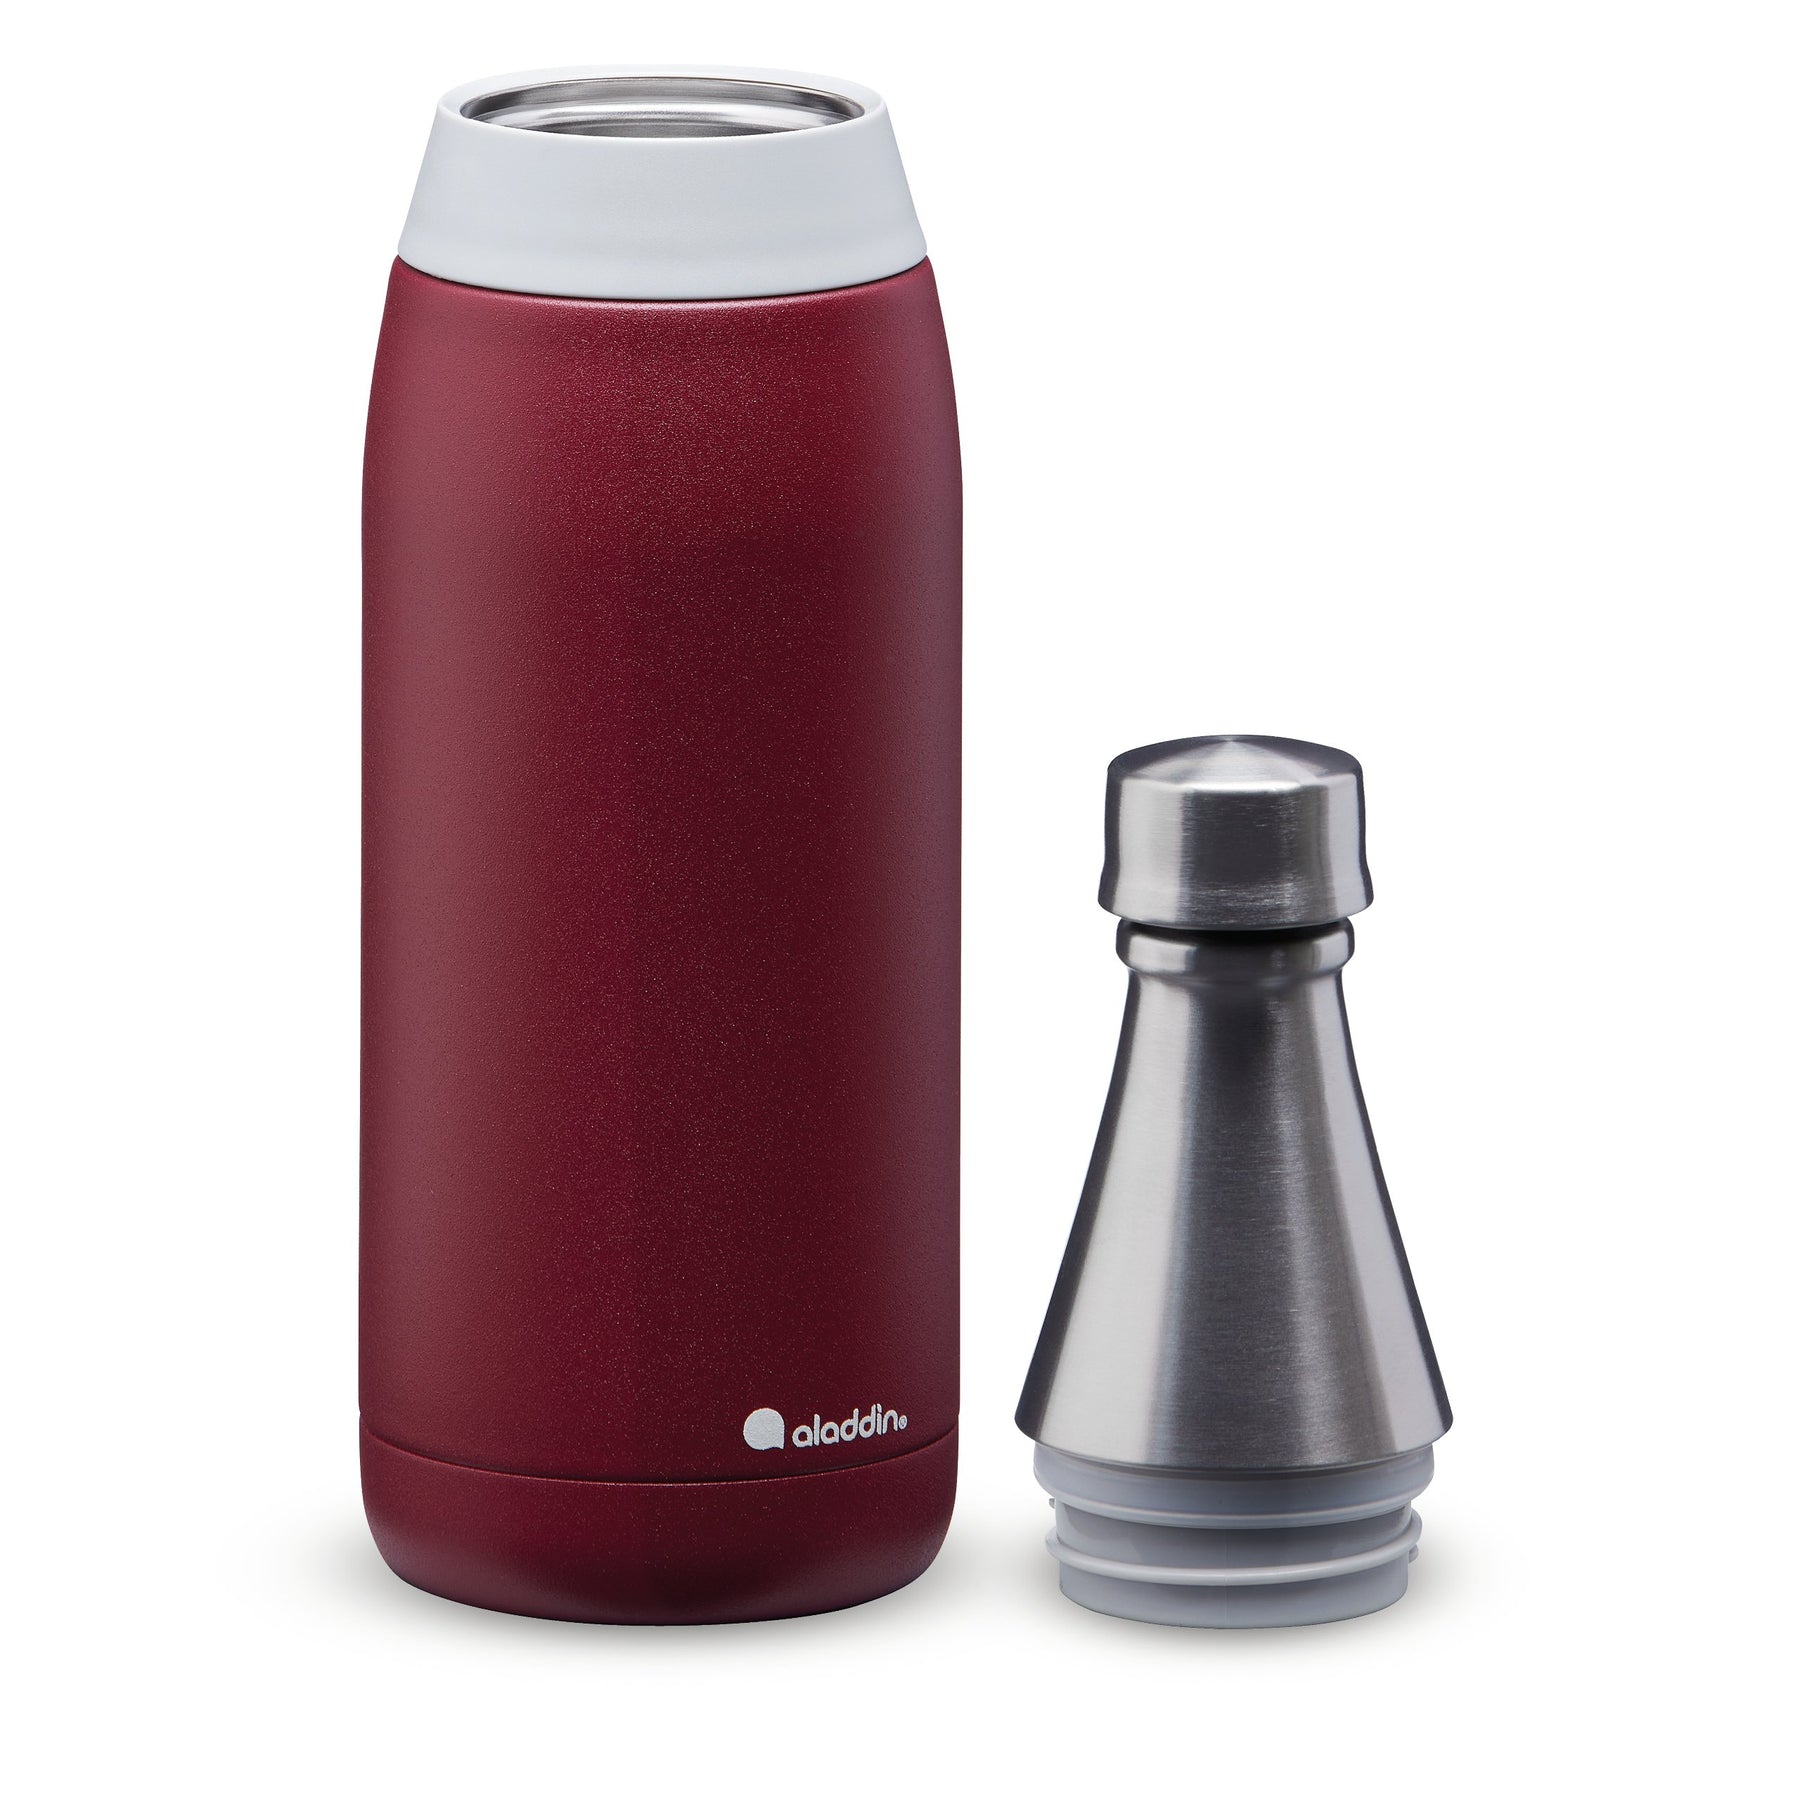 Aladdin-Fresco-Thermavac_-Stainless-Steel-Water-Bottle-0.6L-Burgundy-Red-10-10098-005-Exploded_1800x1800